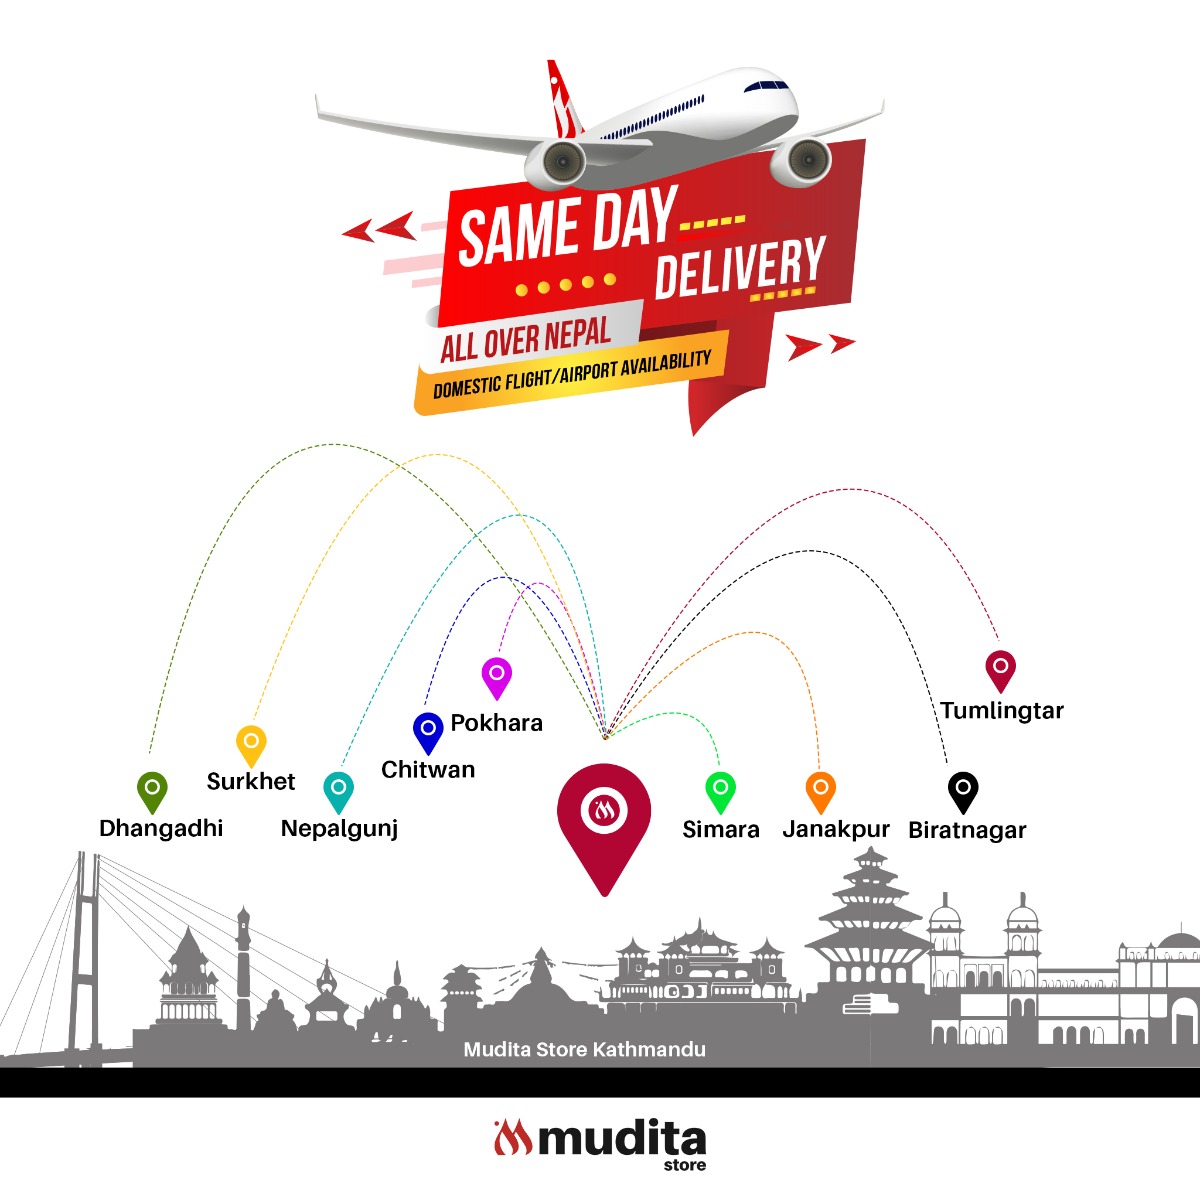 Mudita store provides all over Nepal delivery